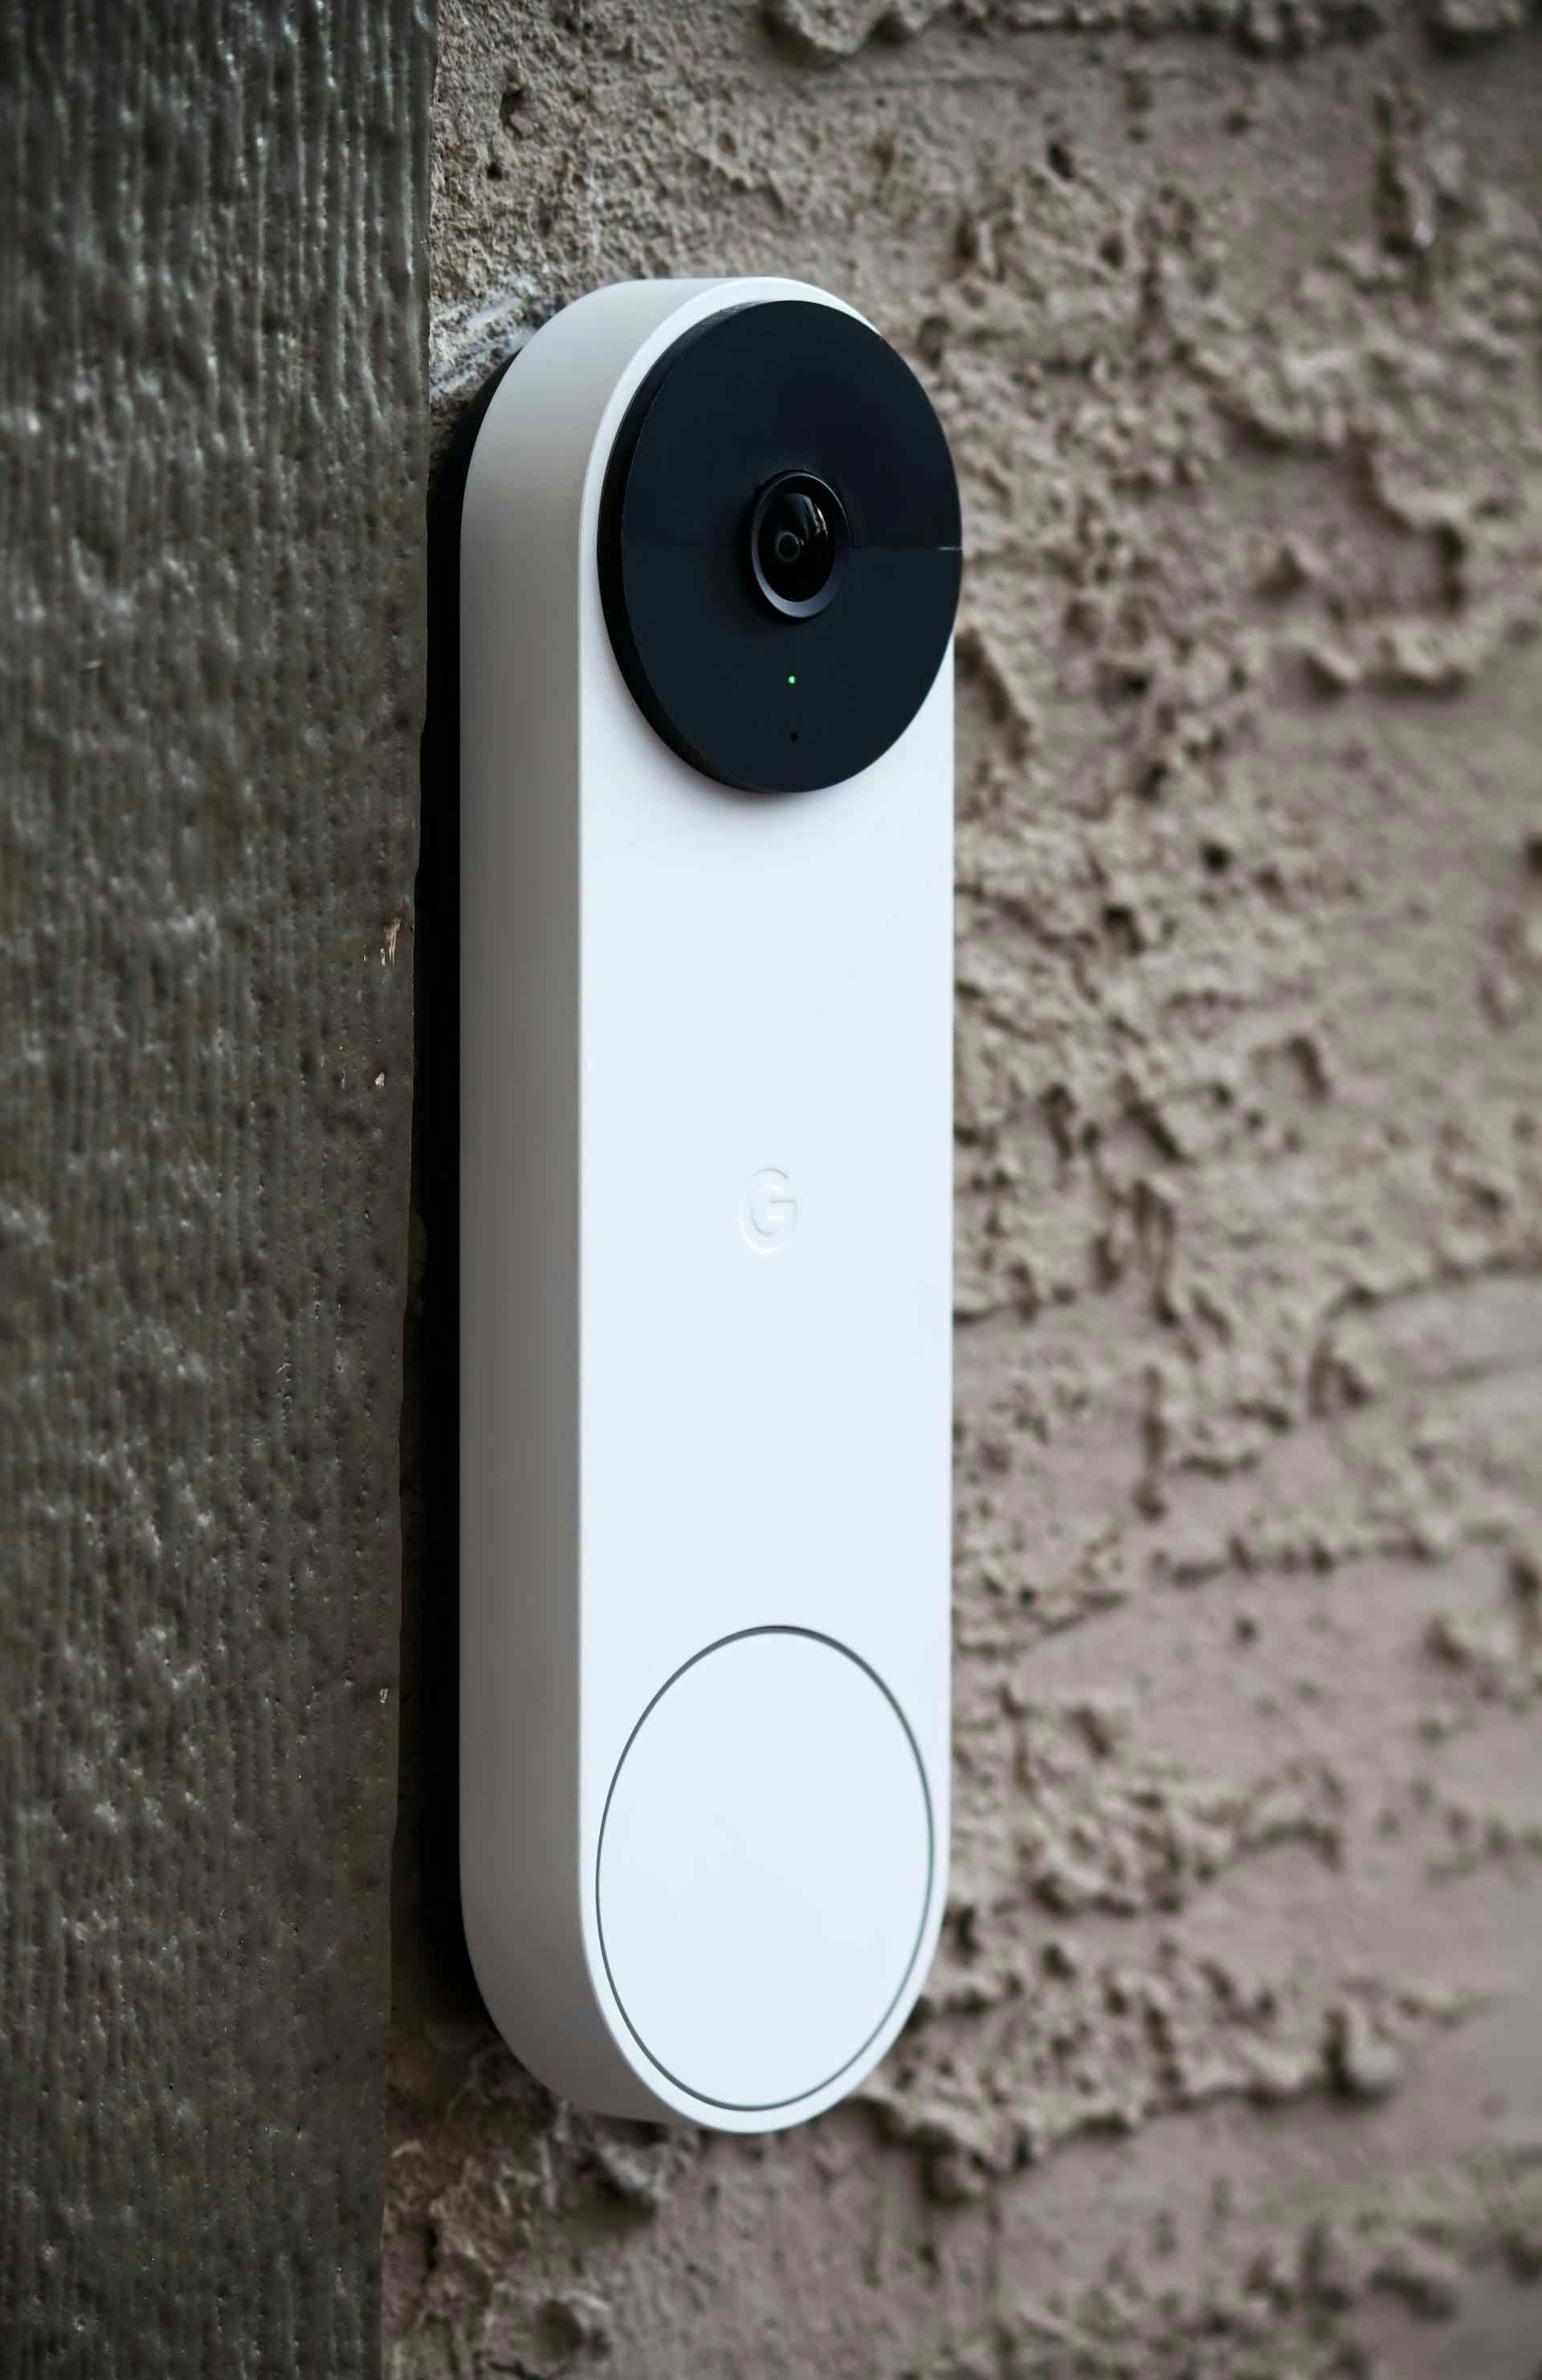 Ring announces new smart intercom extension for apartment